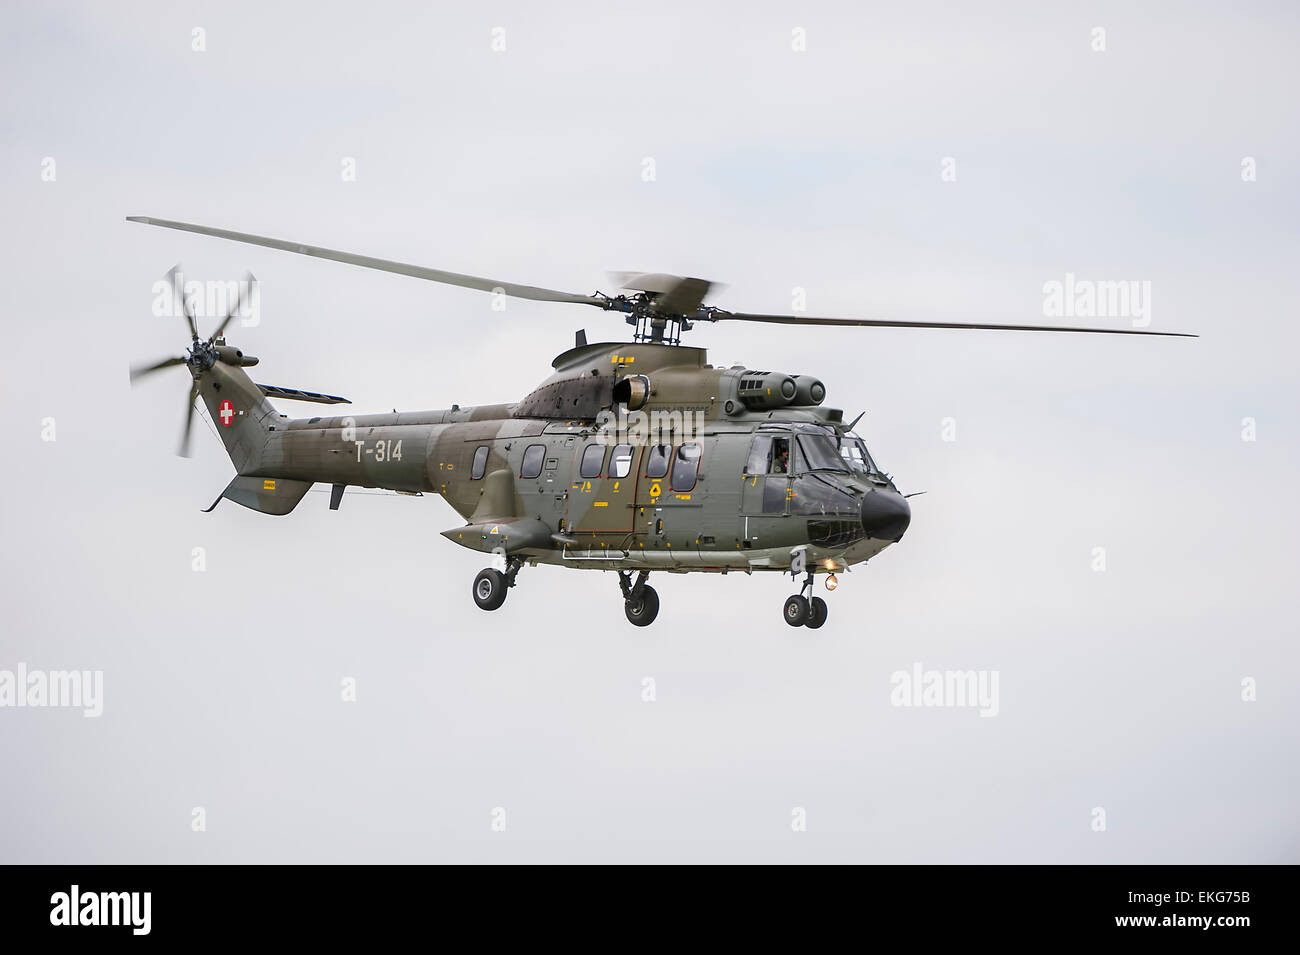 Swiss Air Force AS332M1 Super Puma transport helicopter Stock Photo